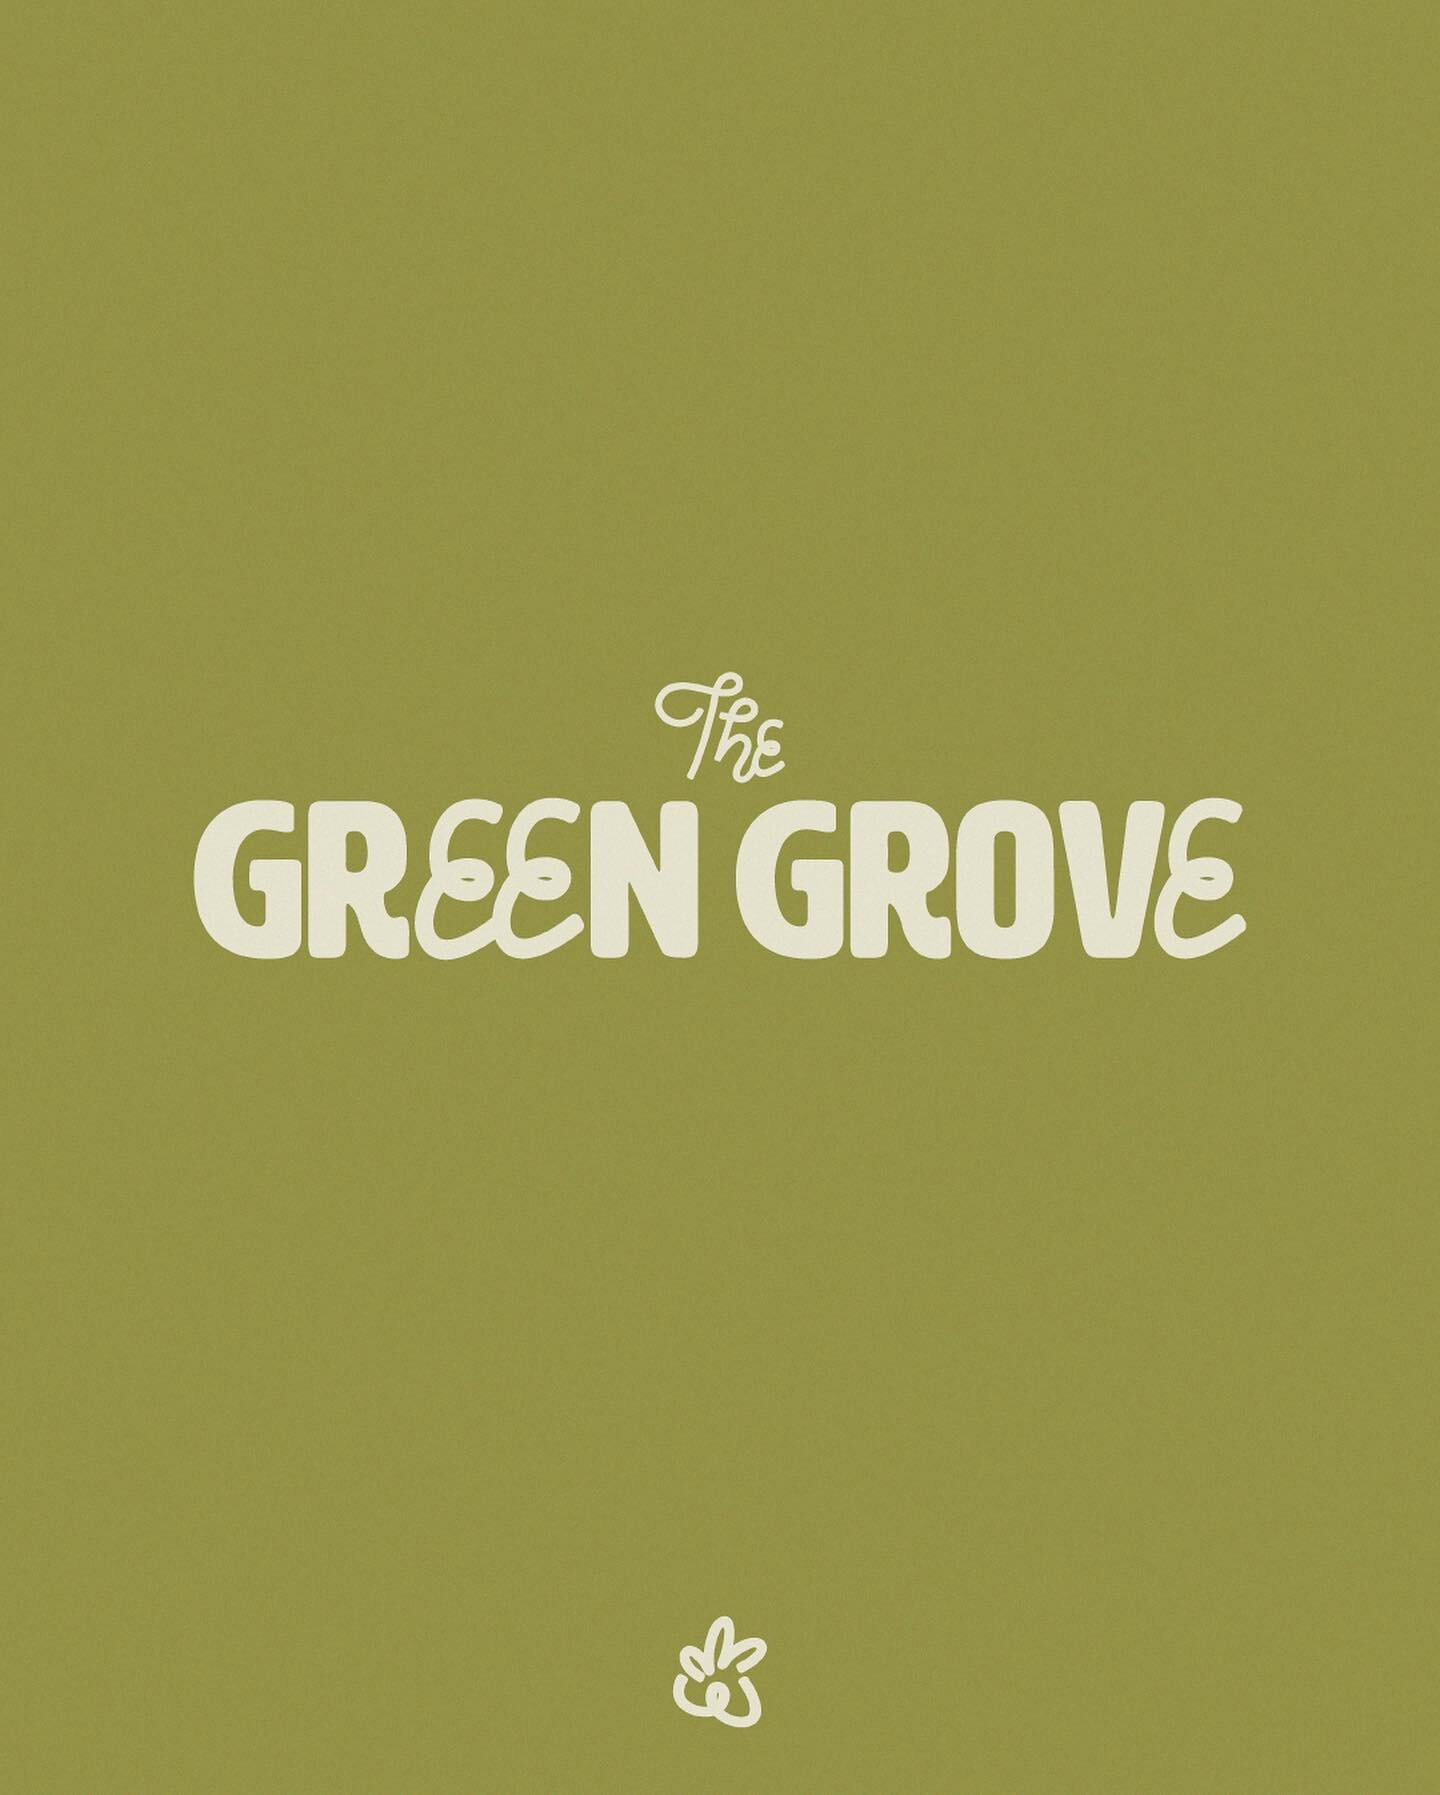 all the packaging essentials for the green grove(:
#tbcthegreengrove @briefclub